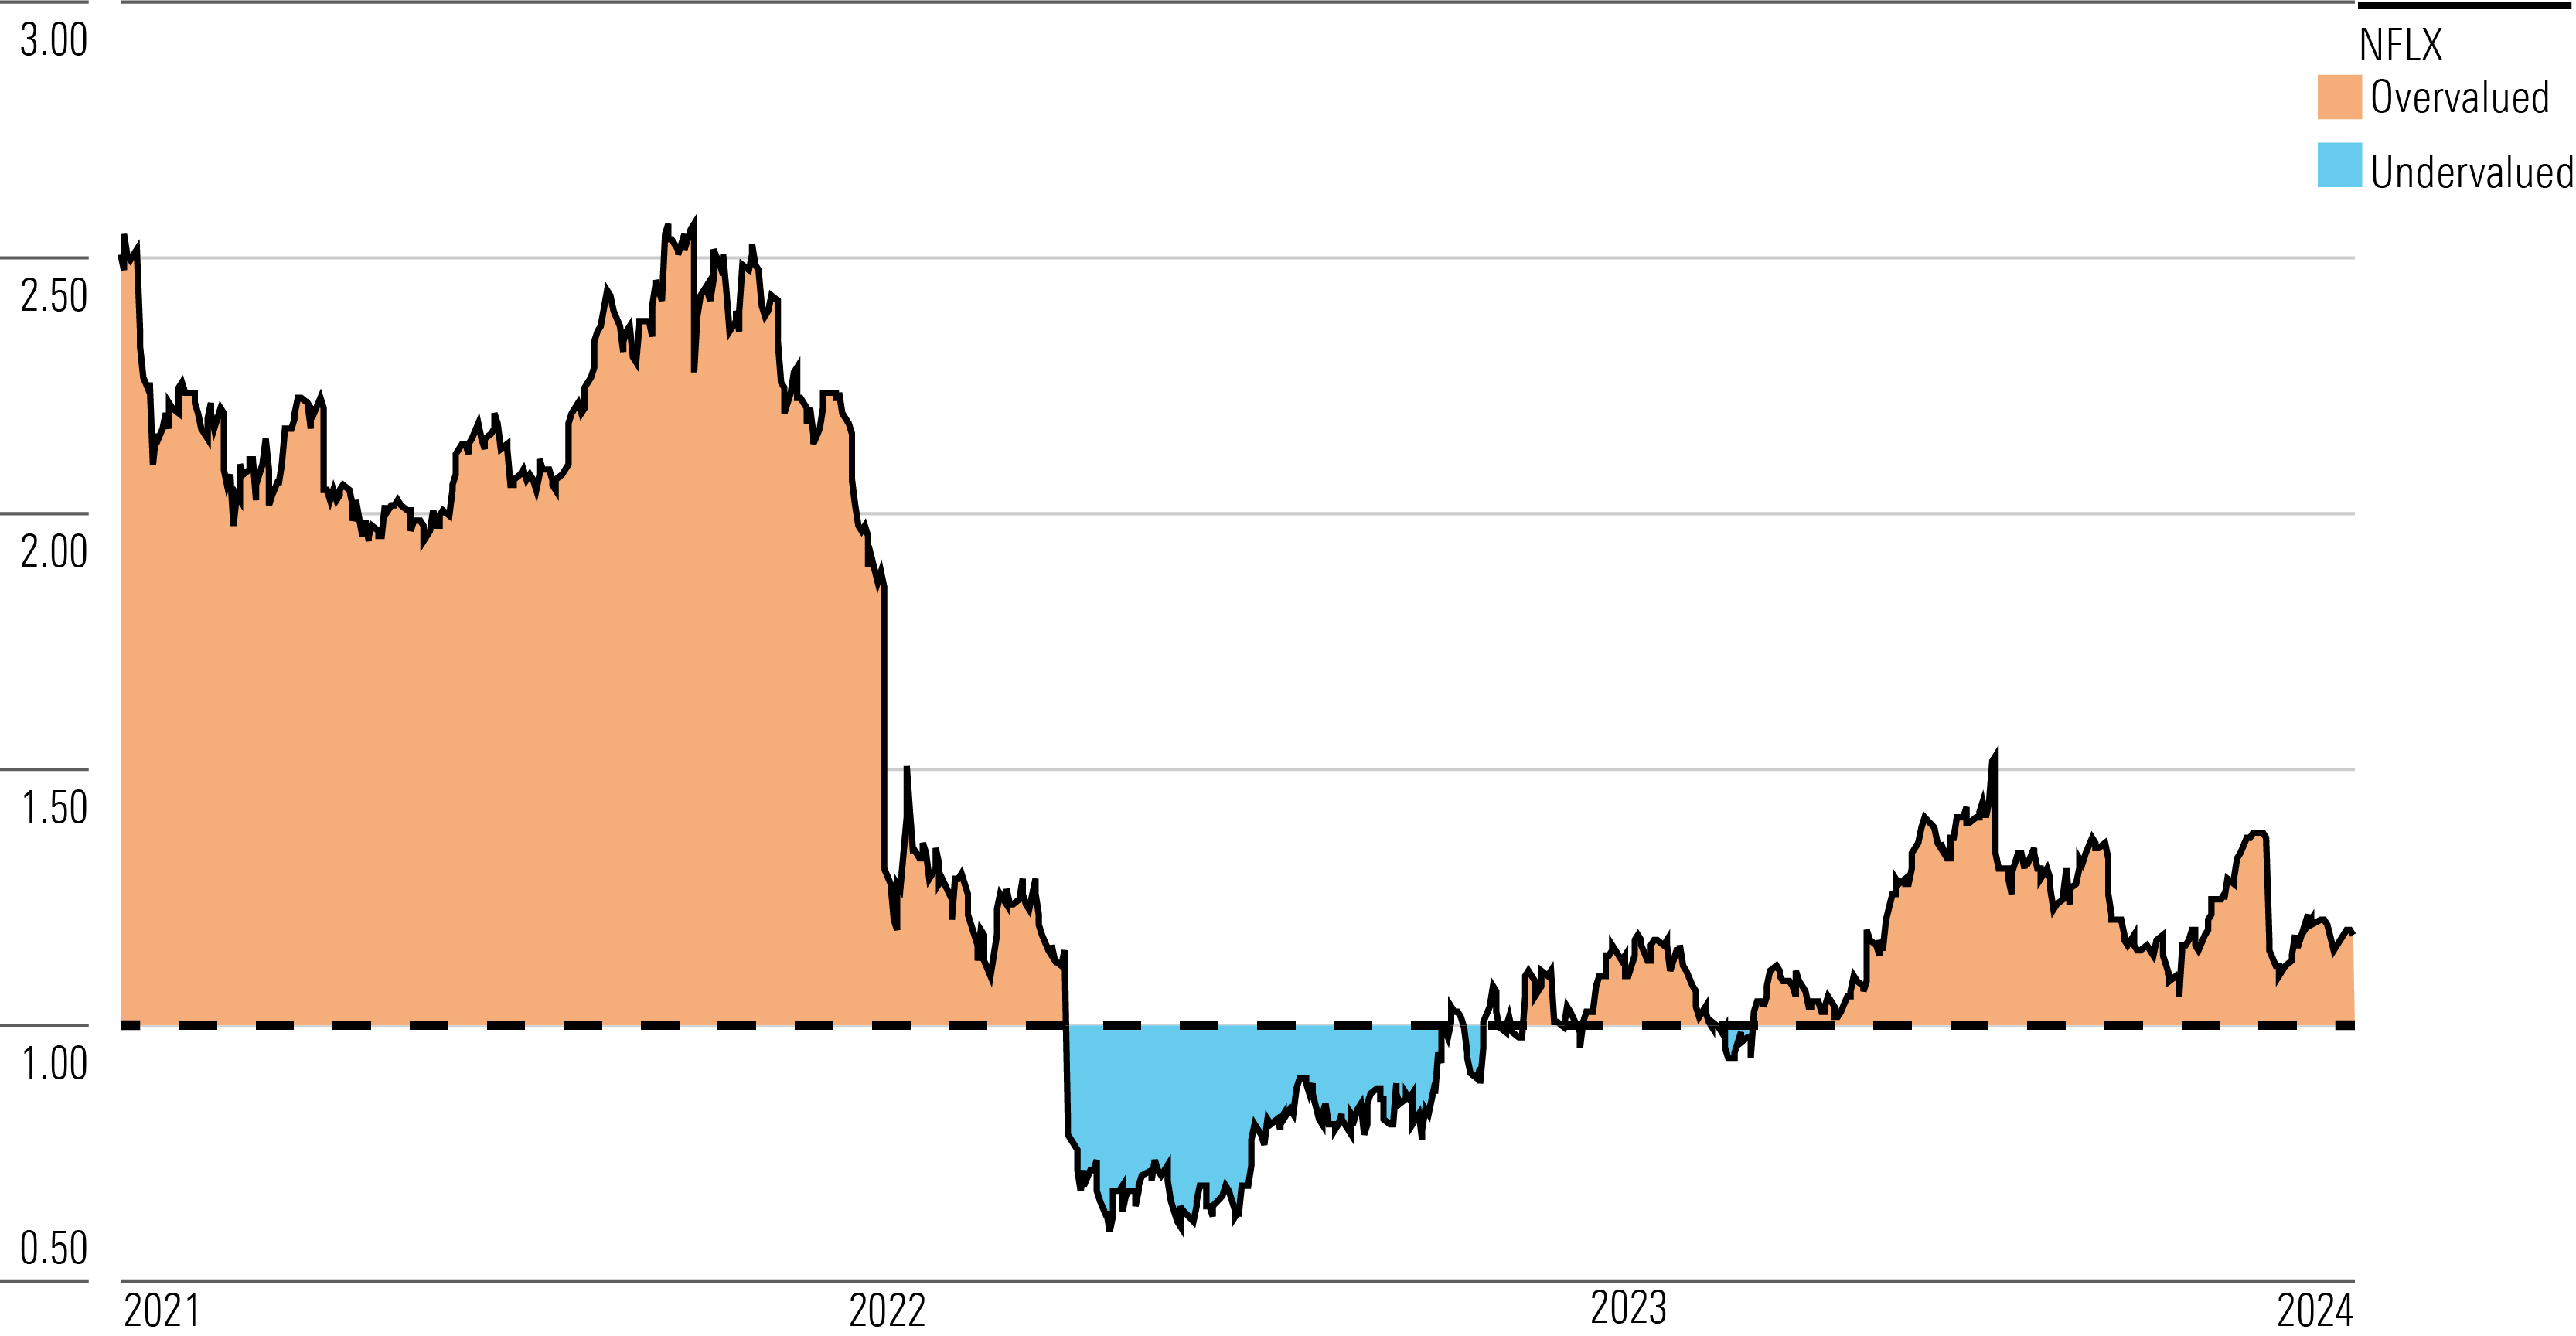 Area chart showing the price to fair-value ratio for Netflix over the past three years through Jan. 11, 2022.